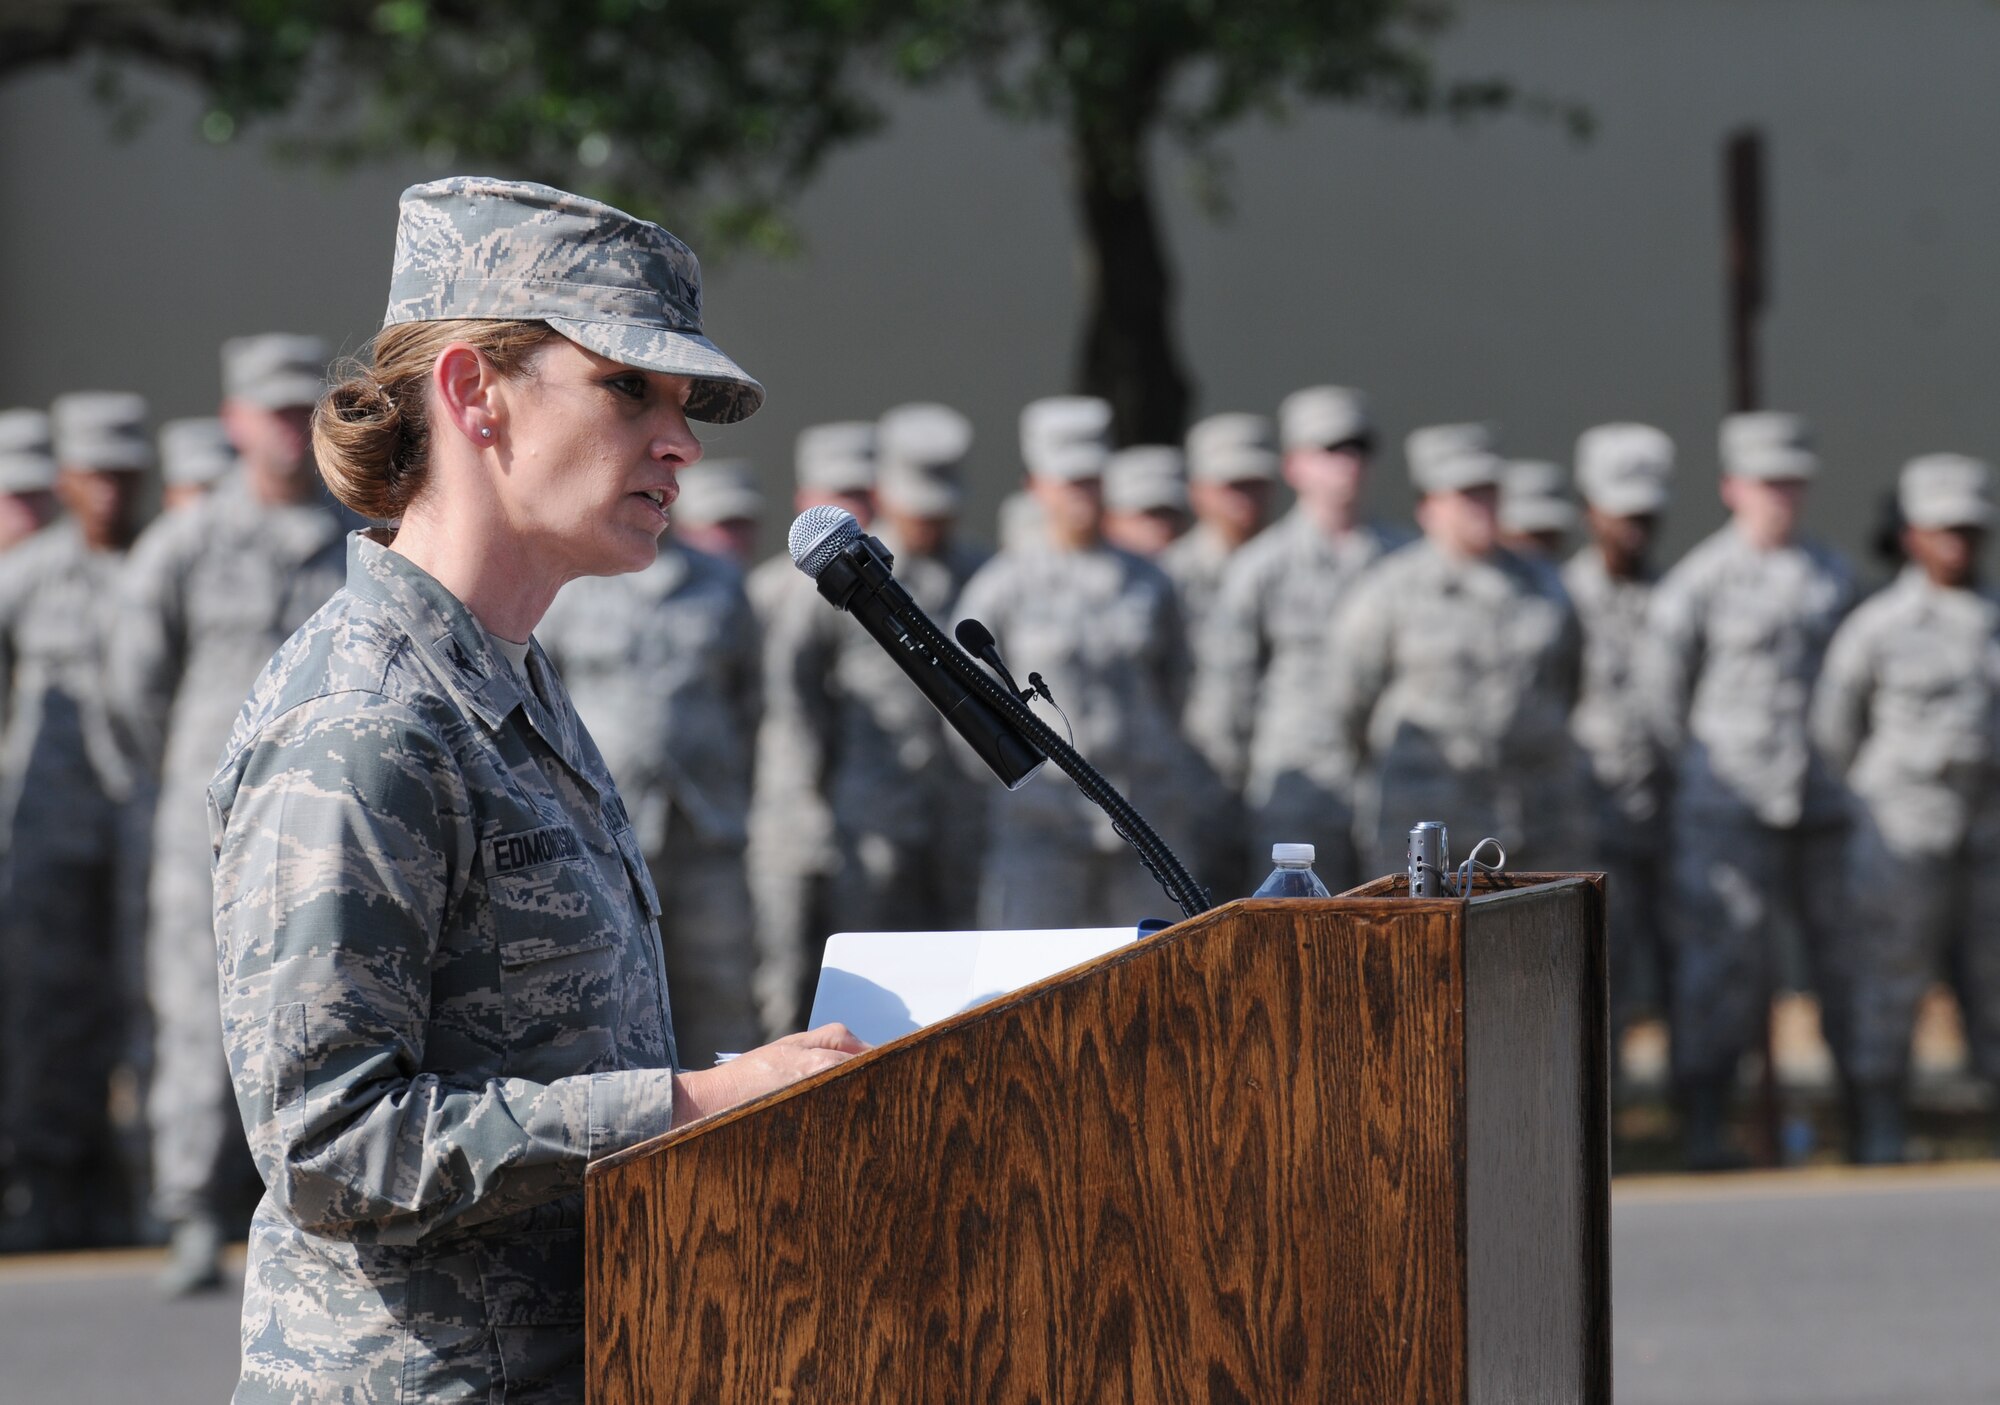 Col. Michele Edmondson, 81st Training Wing commander, delivers opening remarks during the Lt. Samuel Reeves Keesler, Jr. Memorial Retreat Ceremony May 13, 2016, Keesler Air Force Base, Miss. The event was held in honor of Lt. Keesler’s date of entry into the Army Air Service 99 years ago. The retreat ceremony is part of a year-long celebration of Lt. Keesler, a Mississippi native and WORLD WAR I hero, and the 75th anniversary of the opening of the base. (U.S. Air Force photo by Kemberly Groue)